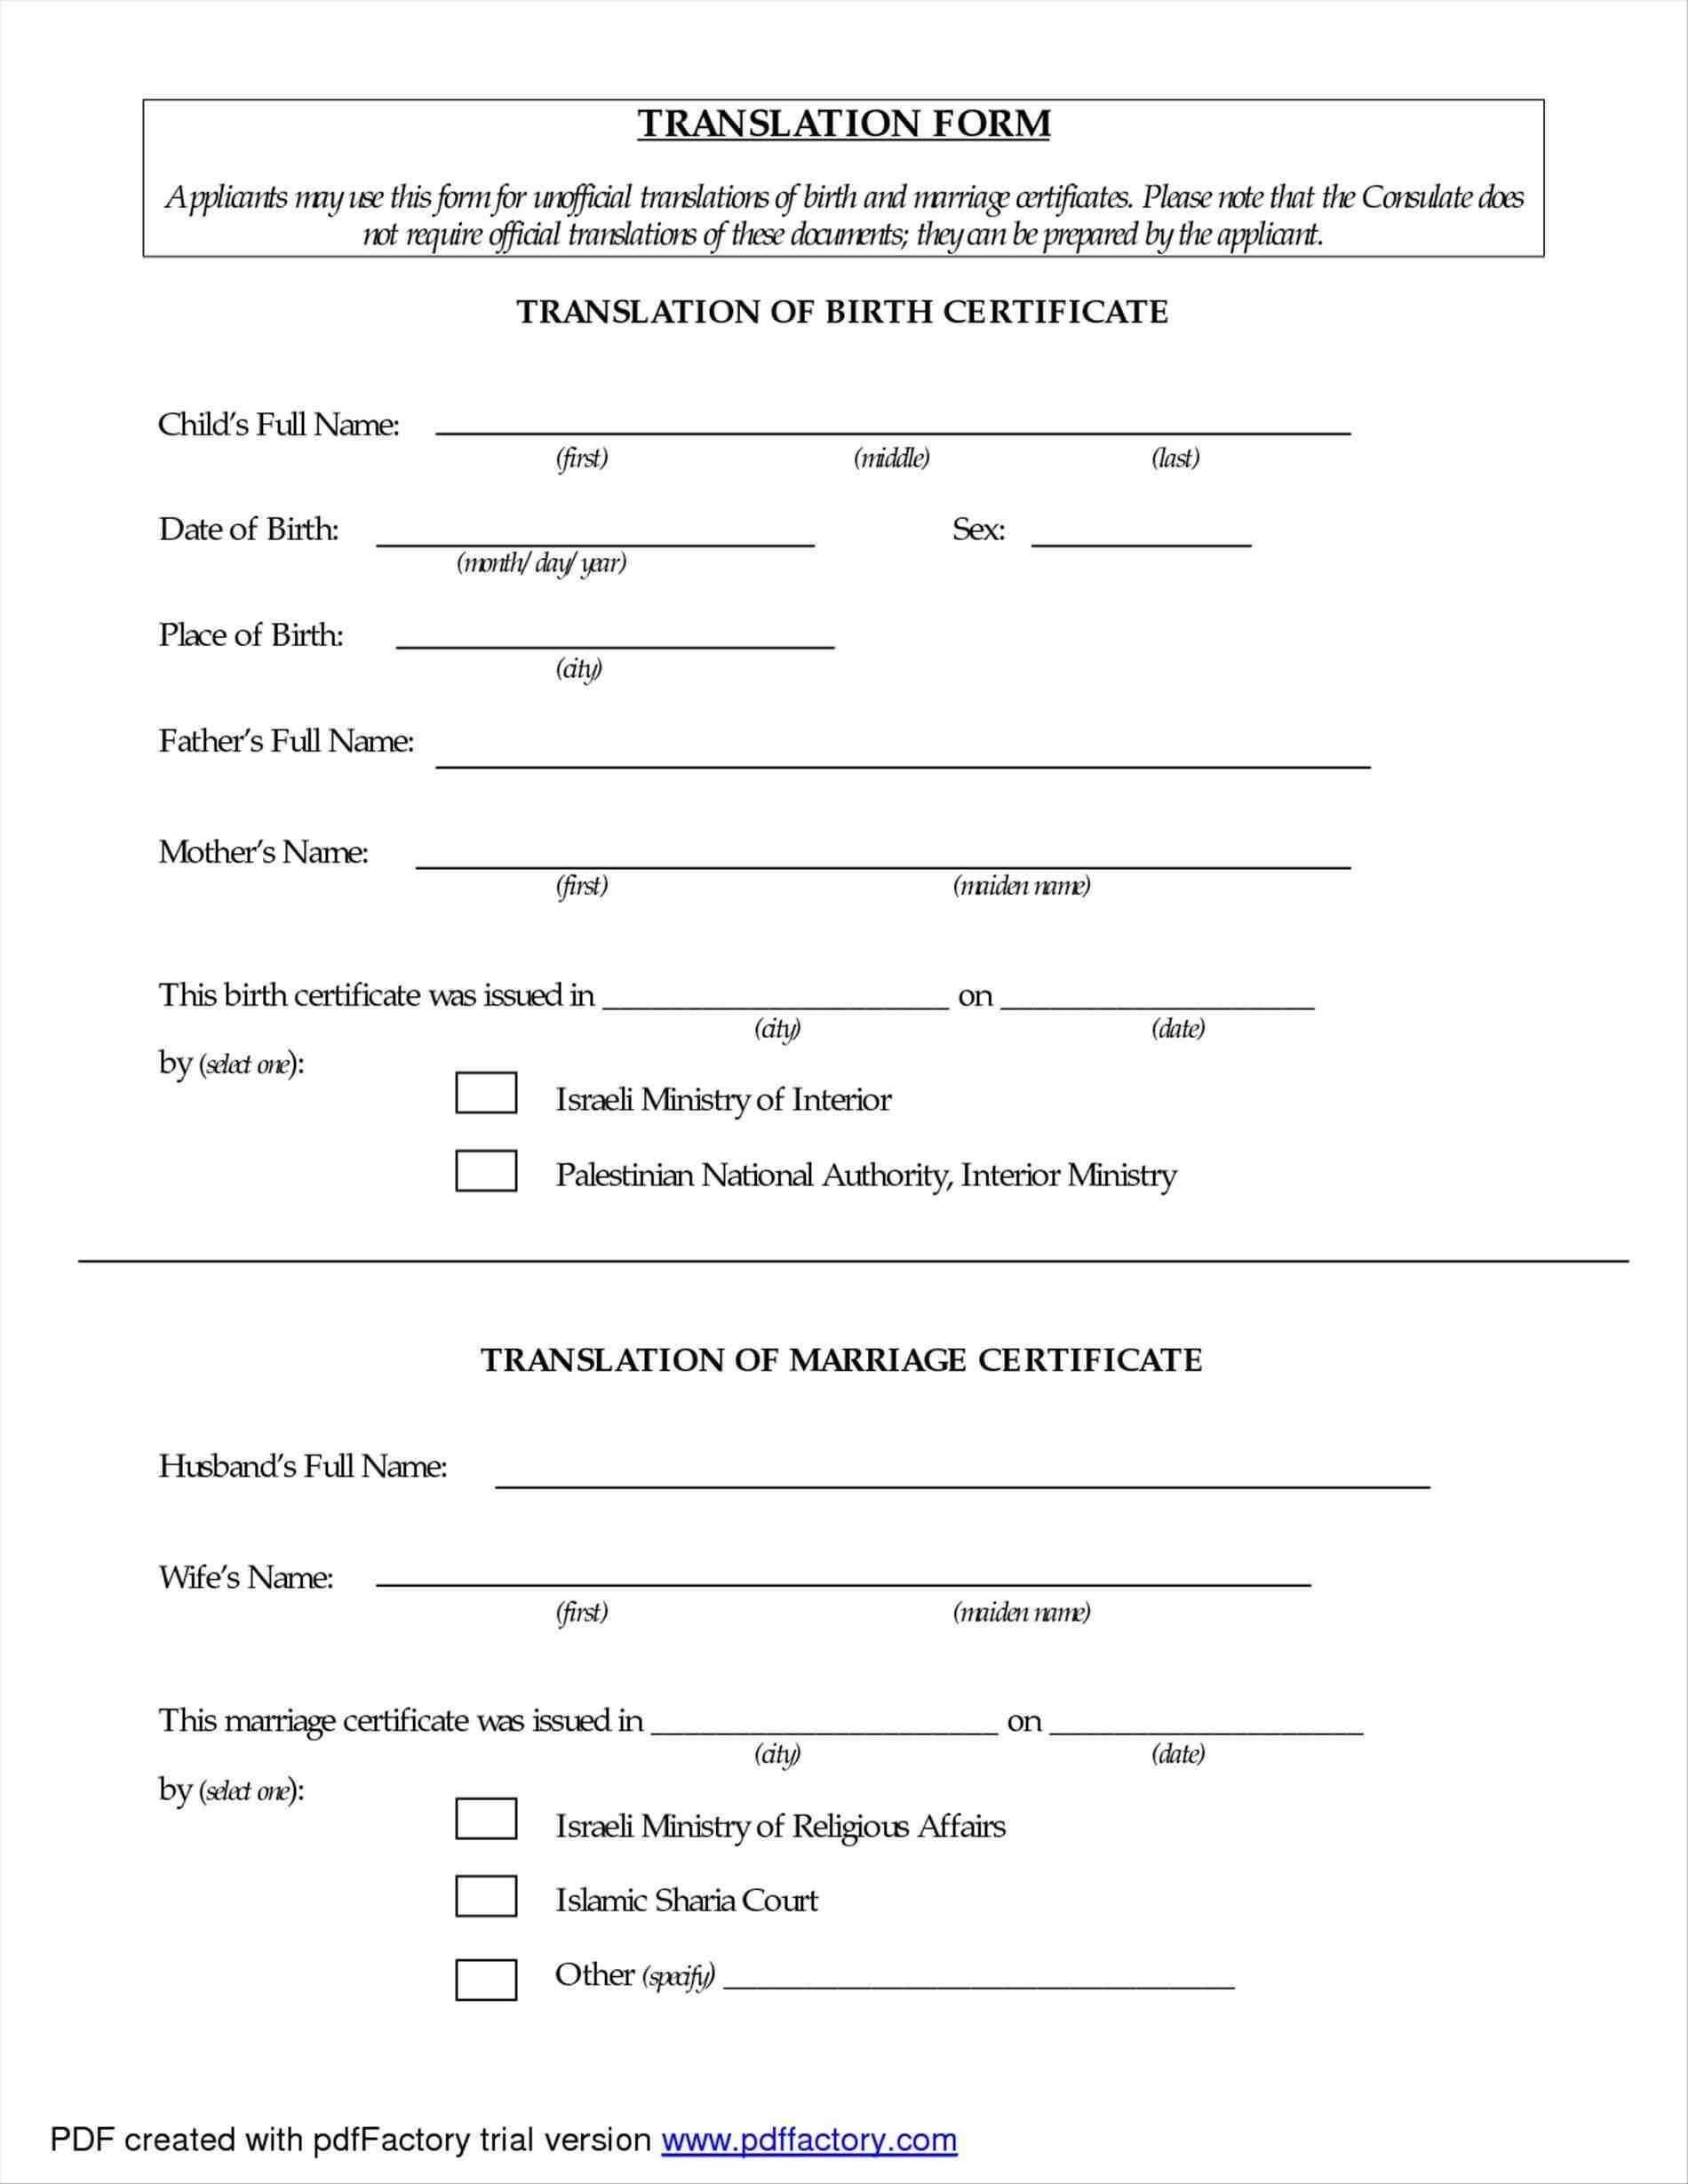 Translate Marriage Certificate From Spanish To English Intended For Spanish To English Birth Certificate Translation Template